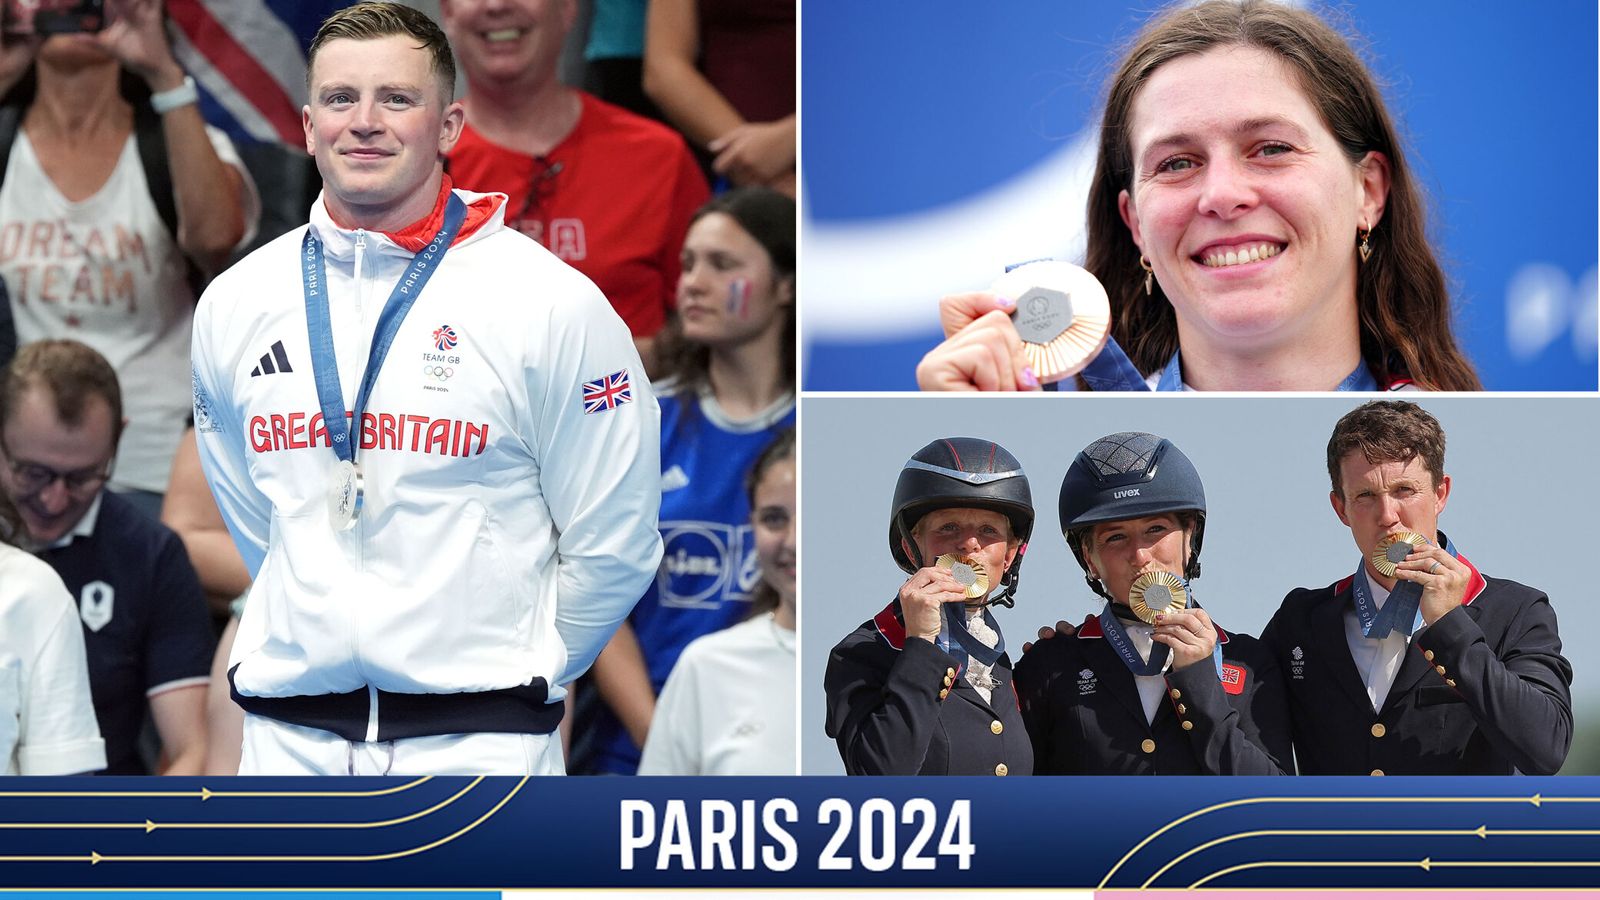 What medals have Team GB won so far at the Paris Olympics?